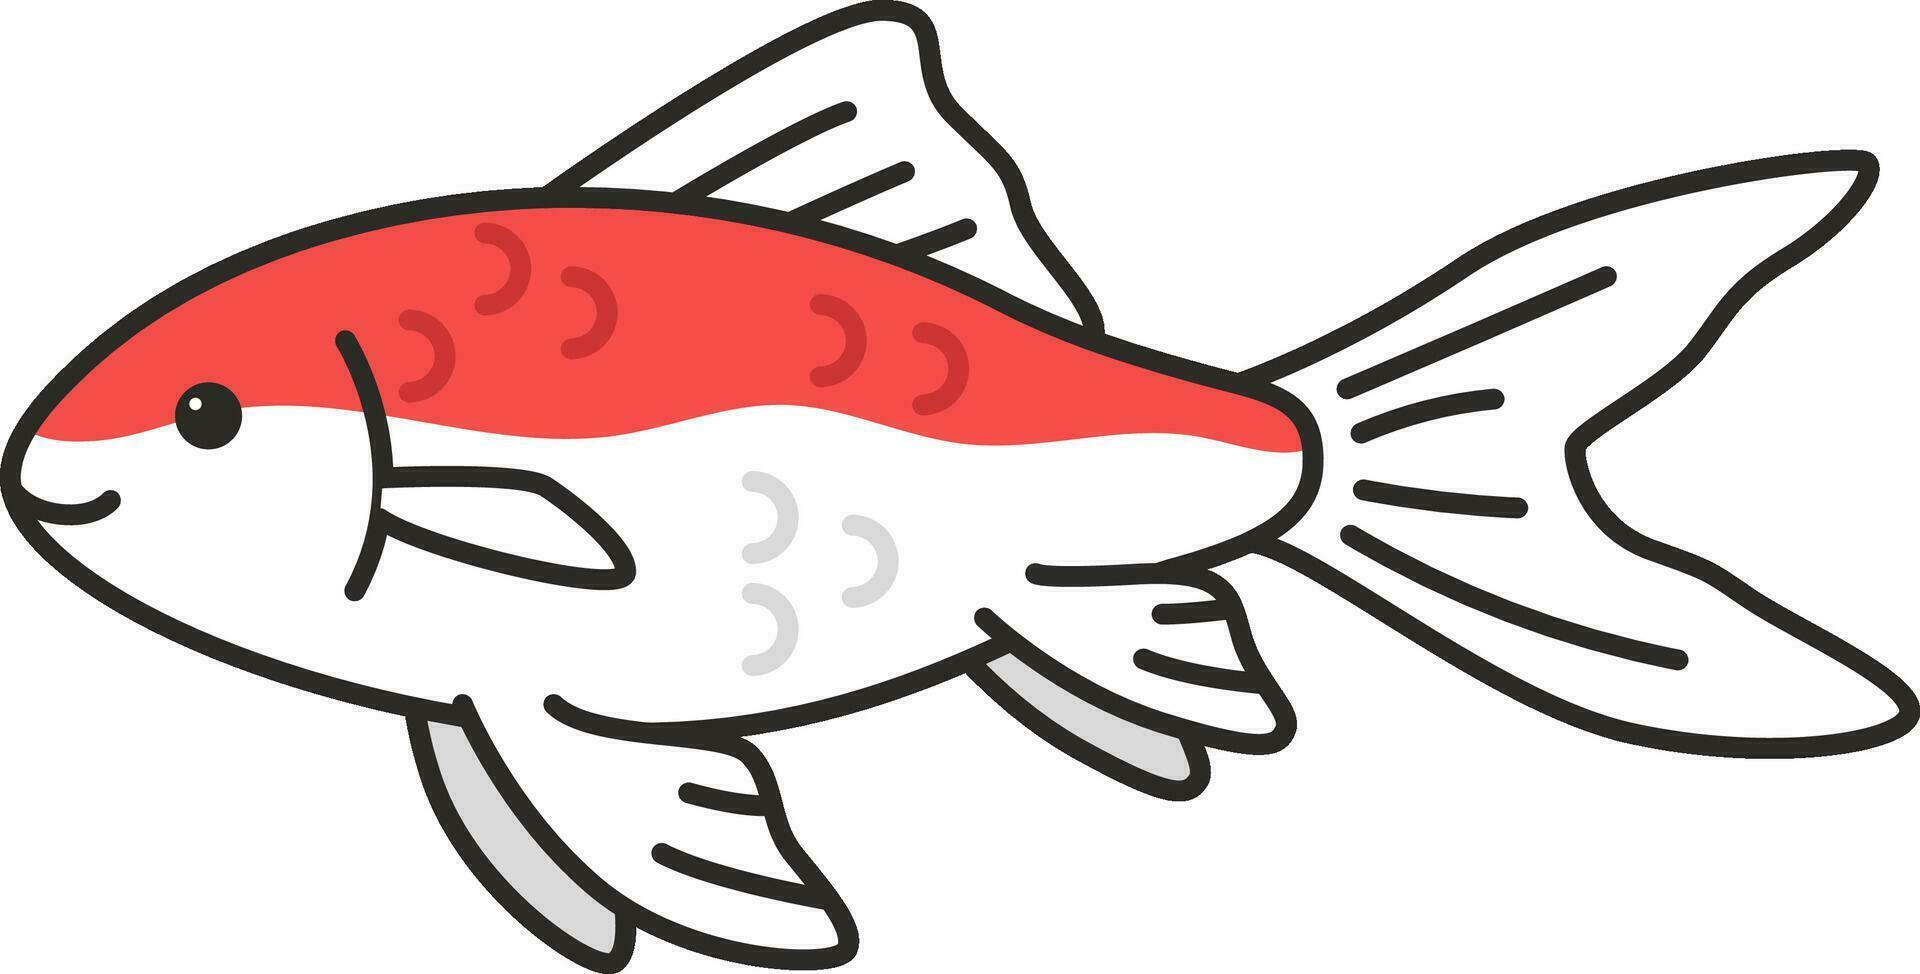 Cute cartoon comet fish. Vector illustration. Isolated on white background.